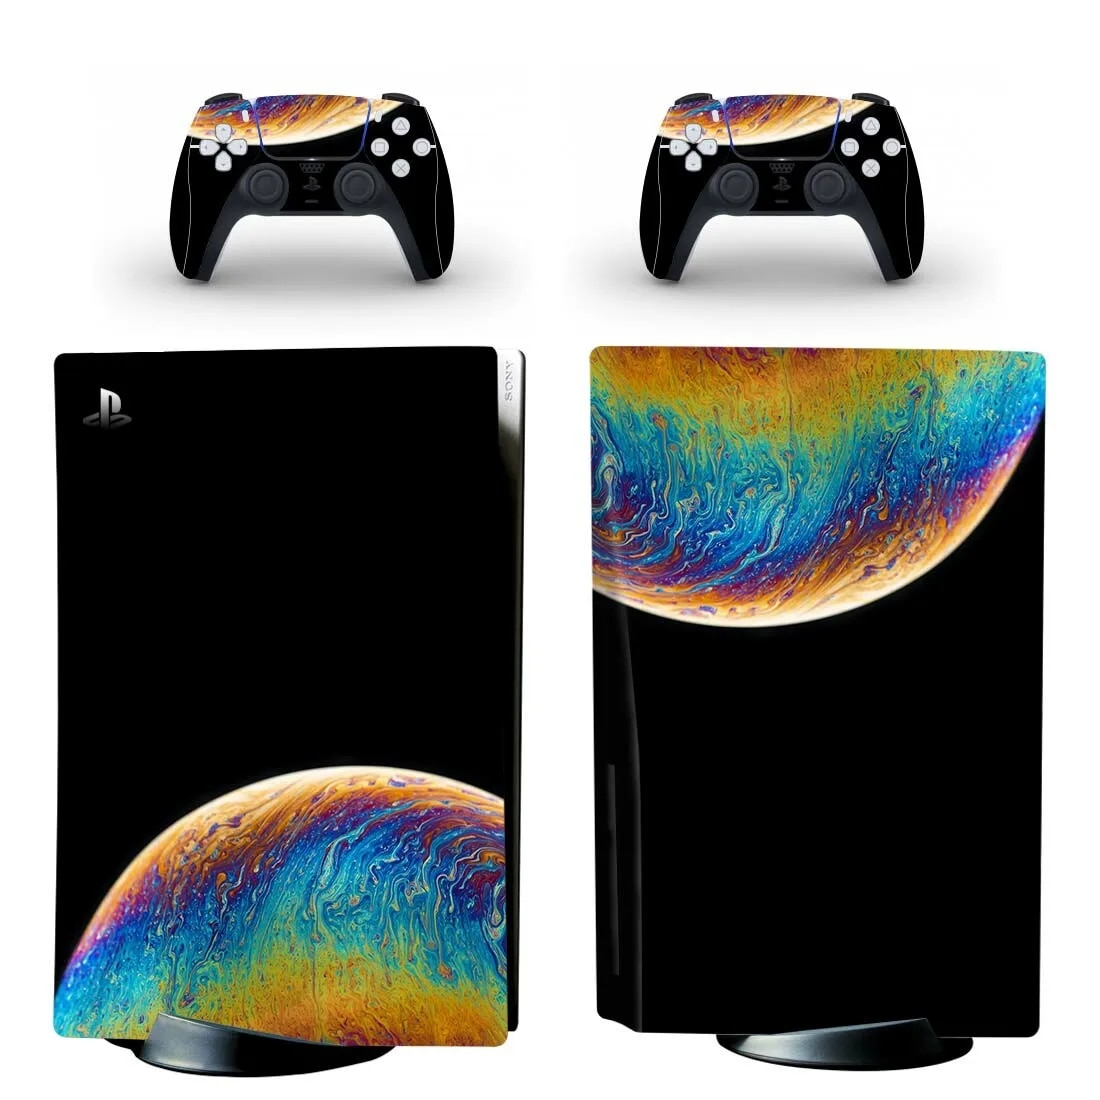 【Bestseller Alert】 Planet Sky Design Ps5 Standard Disk Edition Skin Sticker Decal Cover For 5 Console Controllers Ps5 Skin Cover Vinyl